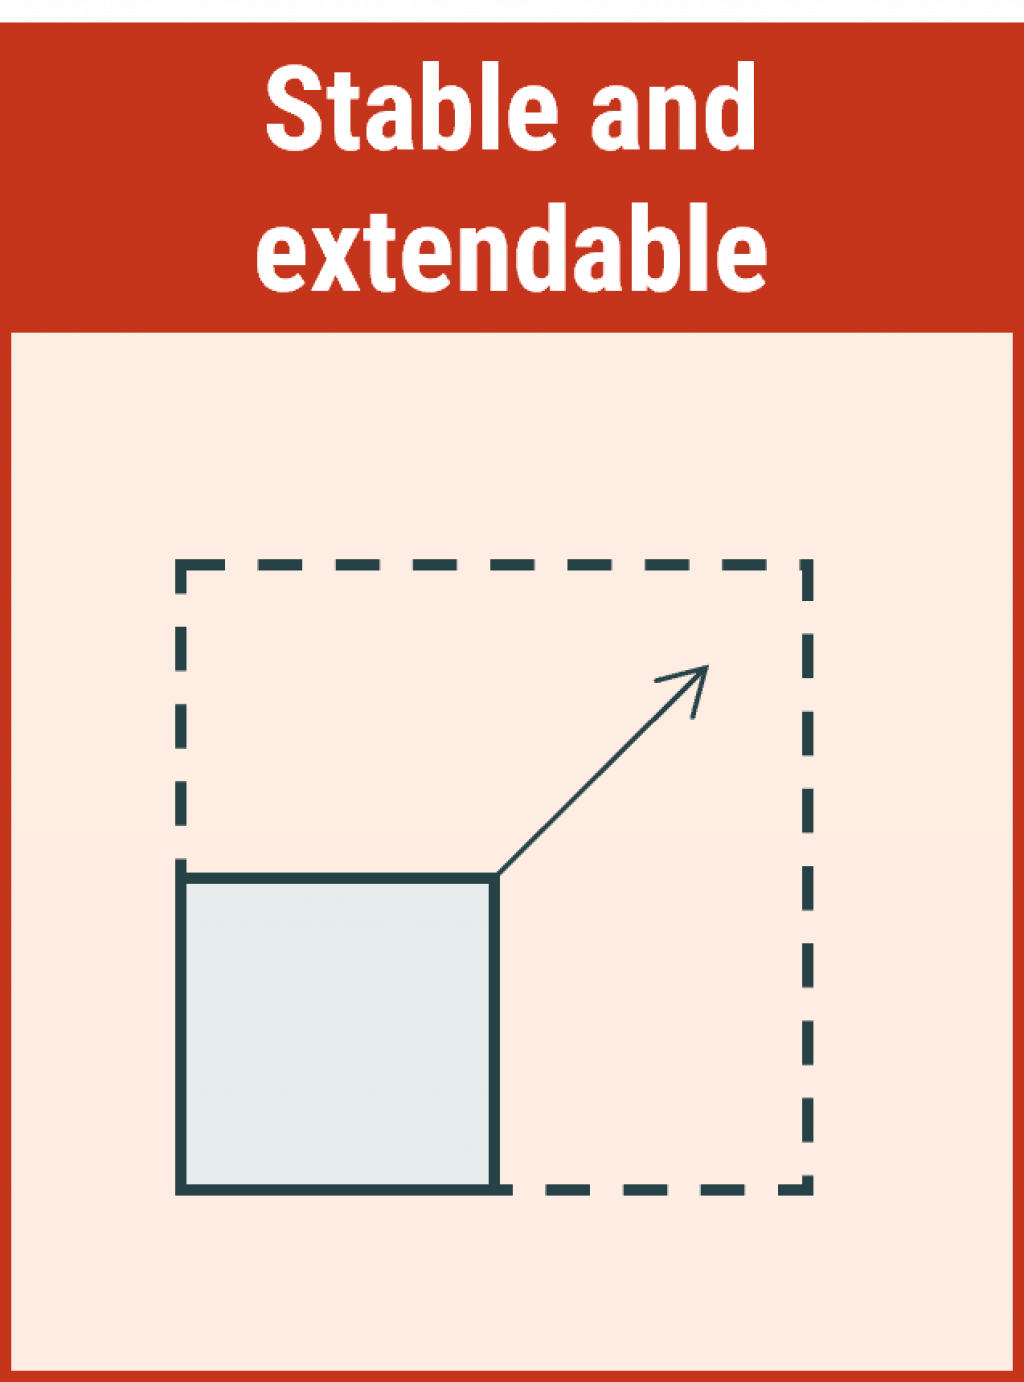 Models should be stable and extendable. Illustration of a little, grey square with a solid border, placed inside a larger, hollow square with a dashed border. An arrow points from the top right corner of the smallest square, up to the top right corner of the largest square.  